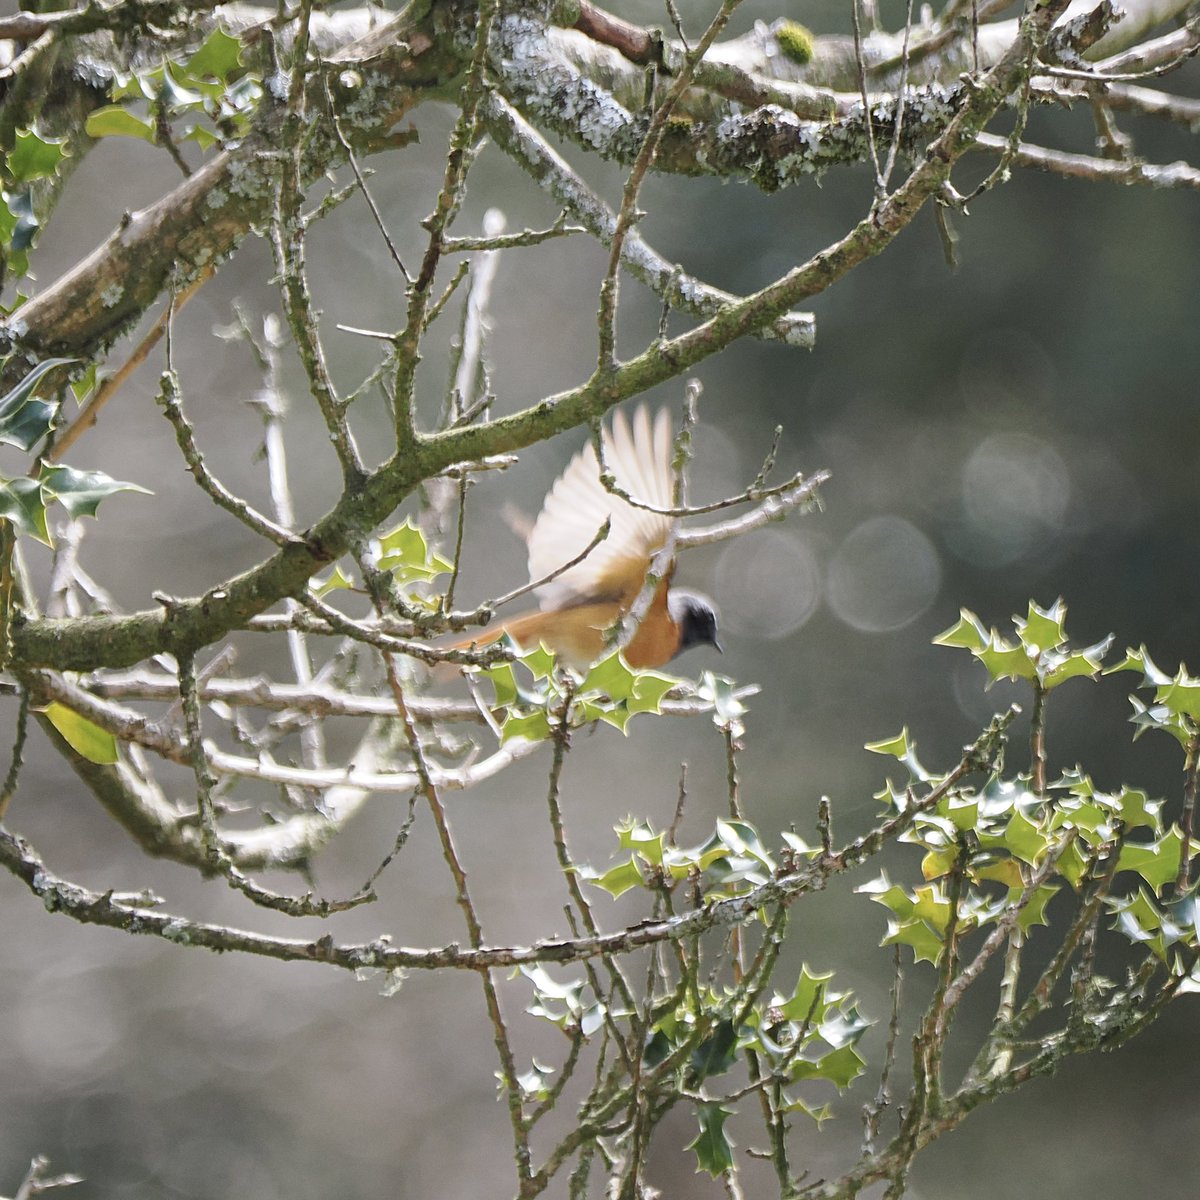 Common redstart back in numbers on the common above Crowcombe today : three singing and this one feeding up near the road. @quantockhills @somersetbirds